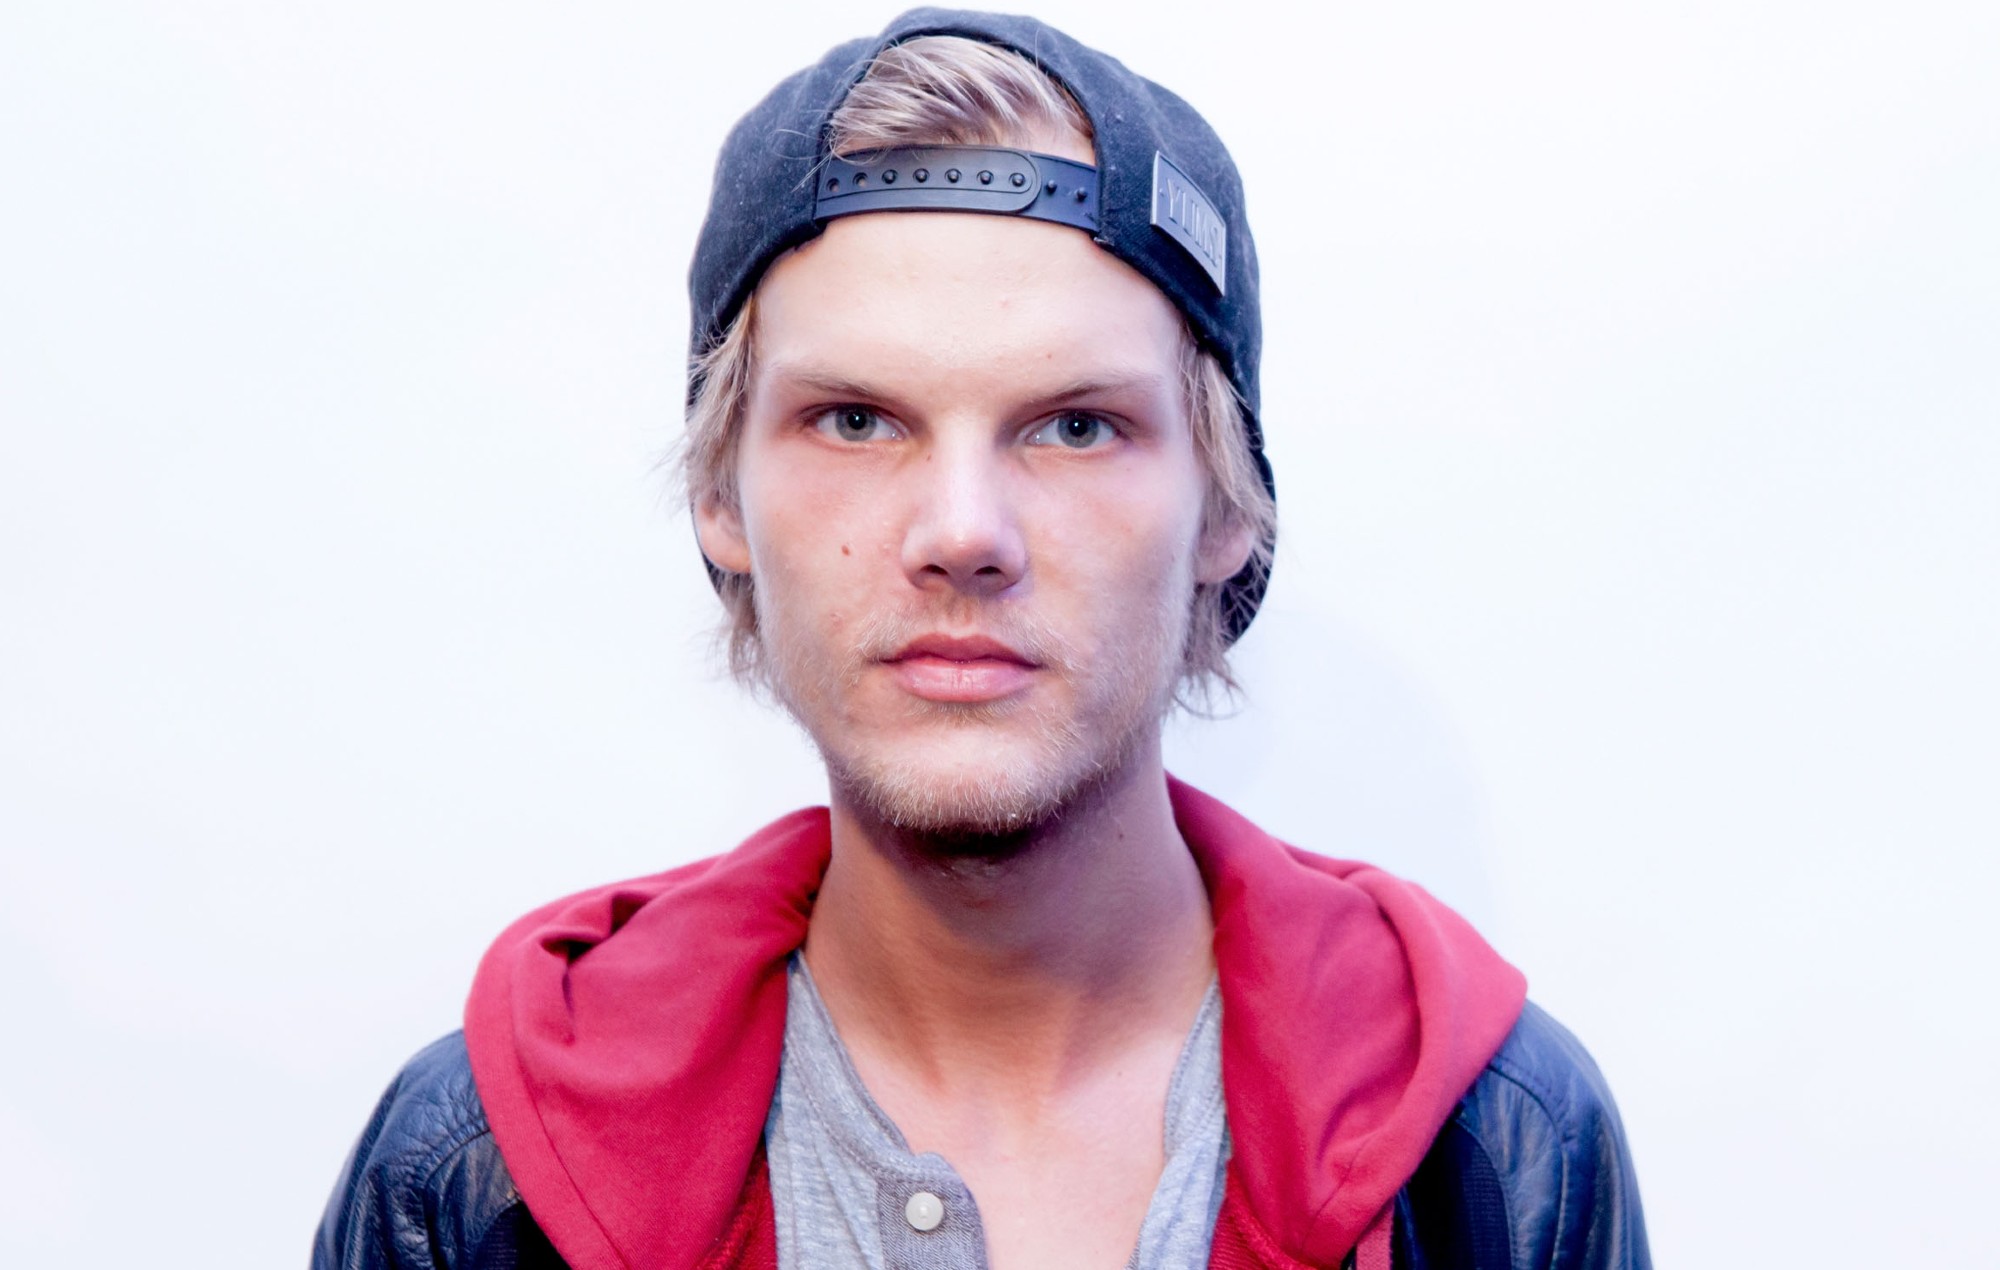 Check out this previously unreleased Avicii remix ‘Beautiful Drug’